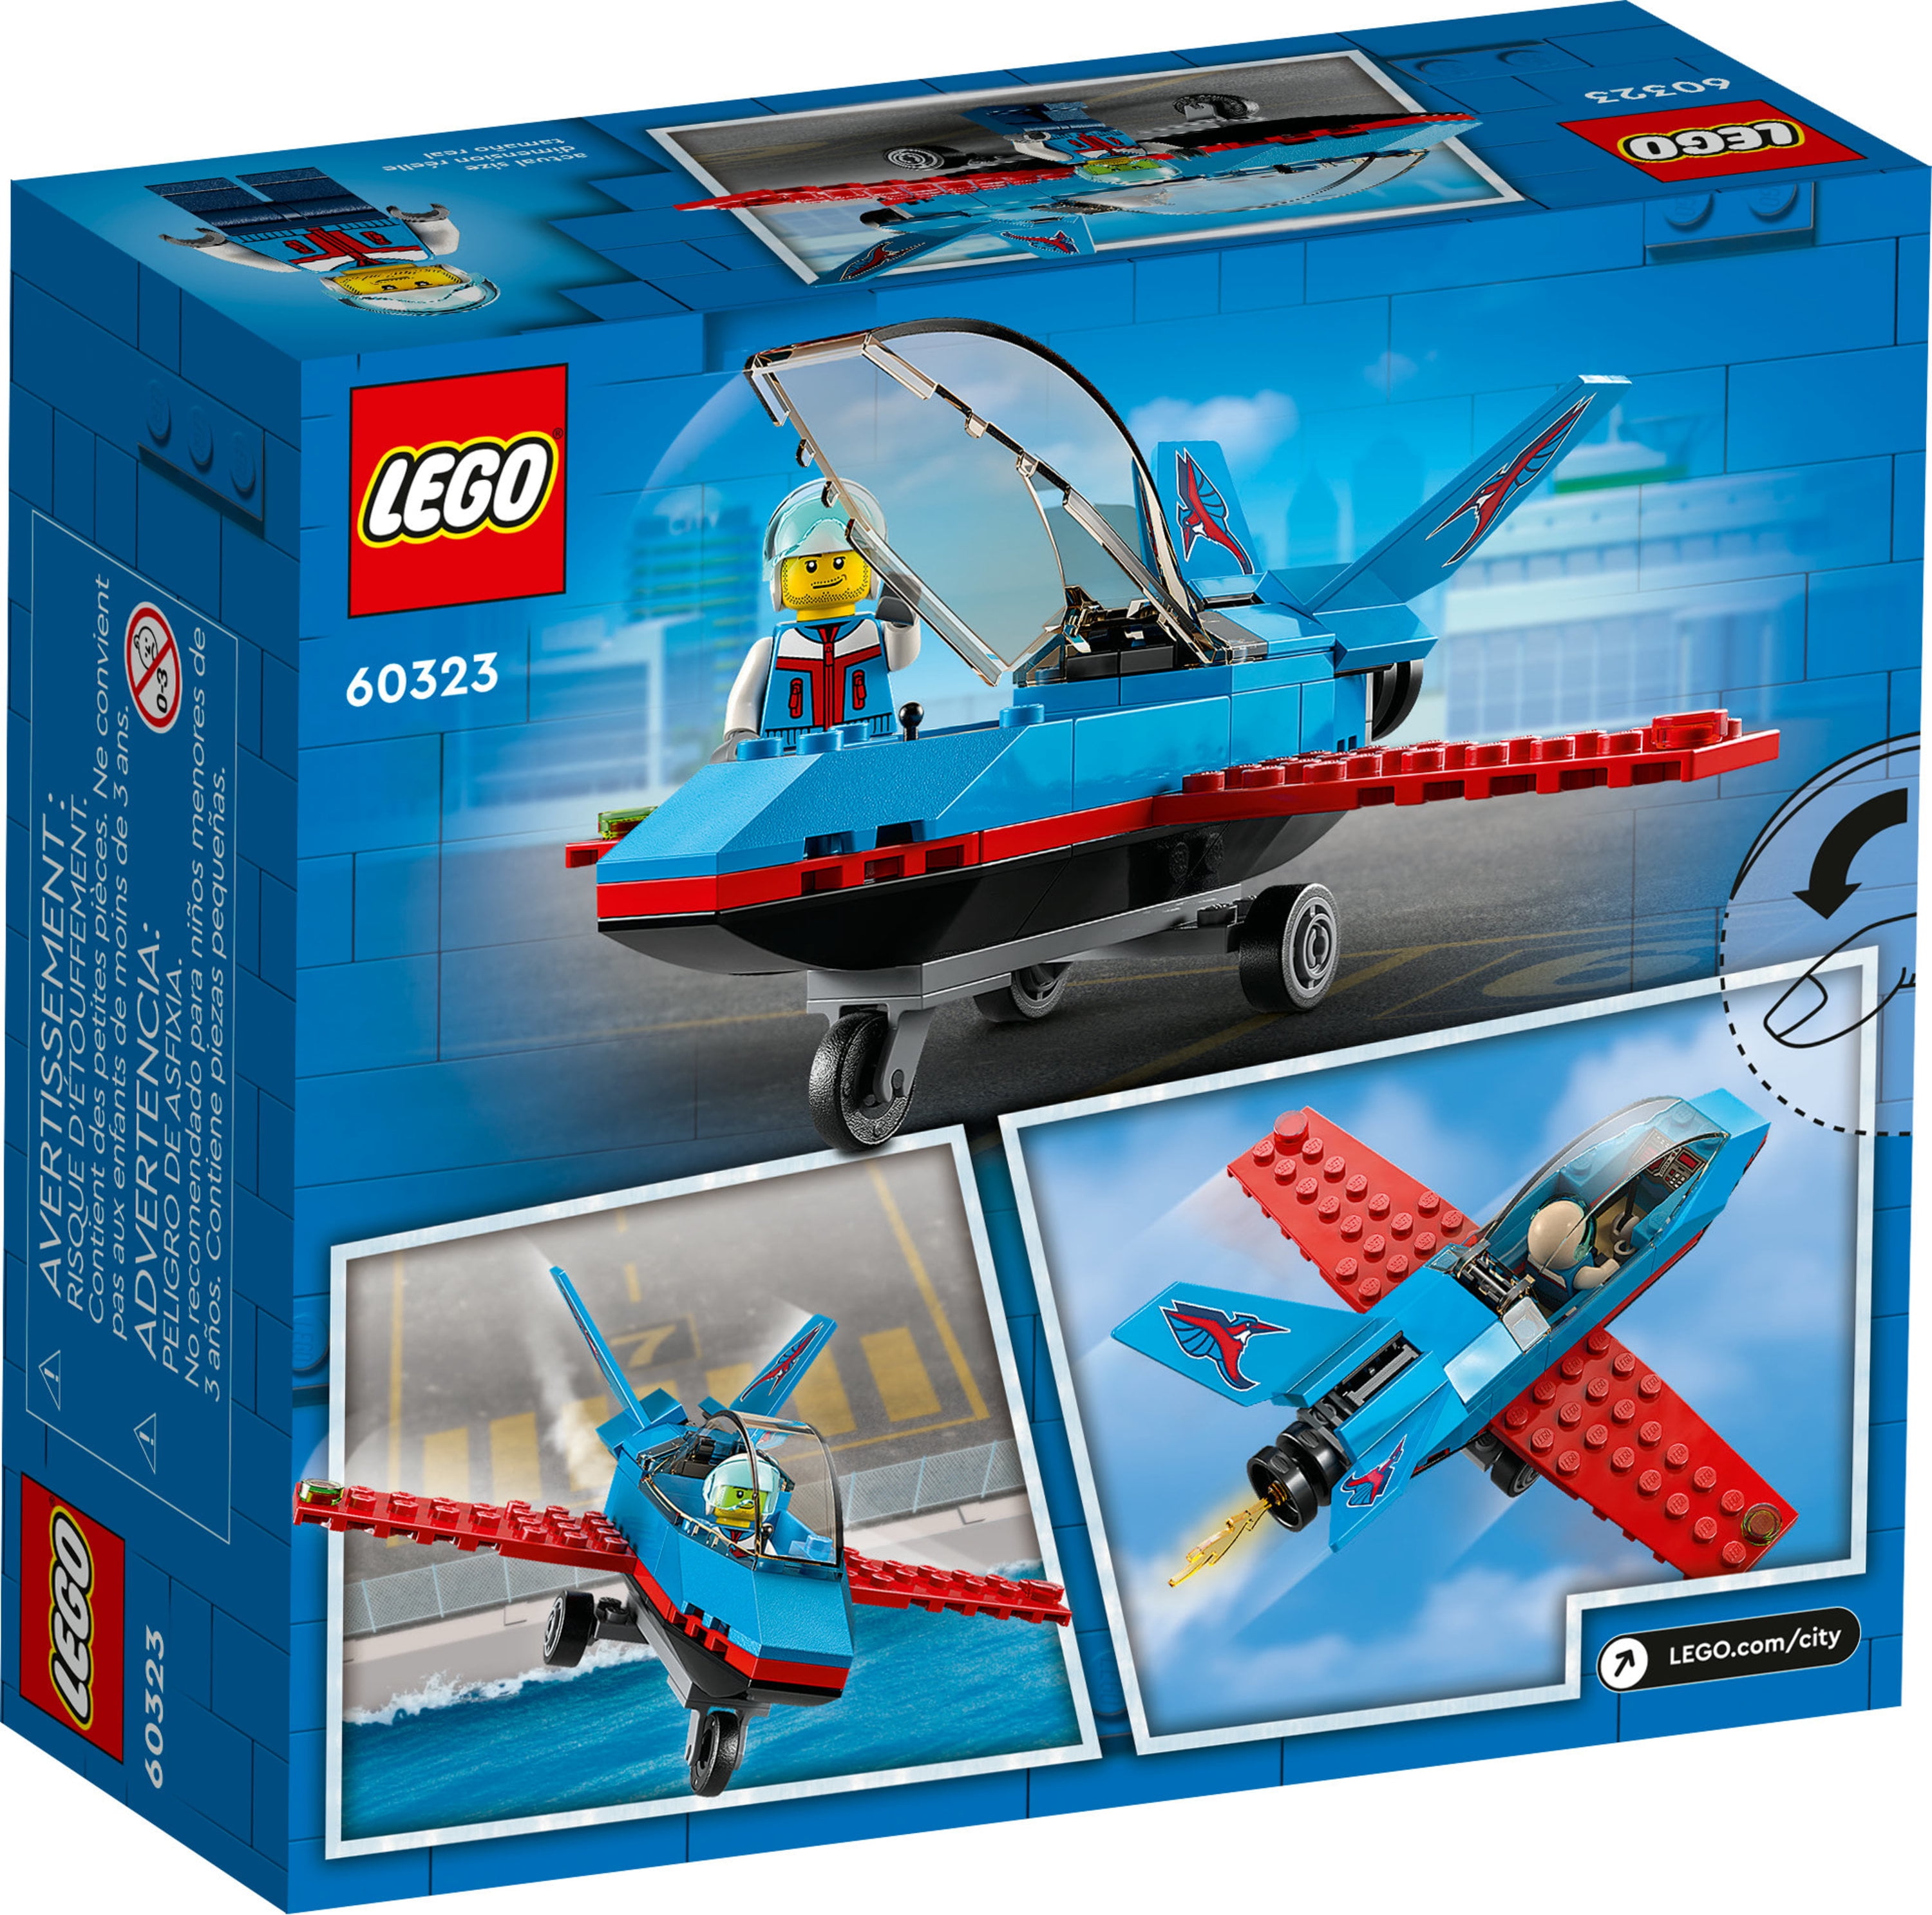 LEGO City Great 60323 Airplane for Jet Minifigure Girls with Gifts Set, Building and Pilot Toy, 5 Old Kids, 2022 plus Vehicles Years Boys Stunt Plane